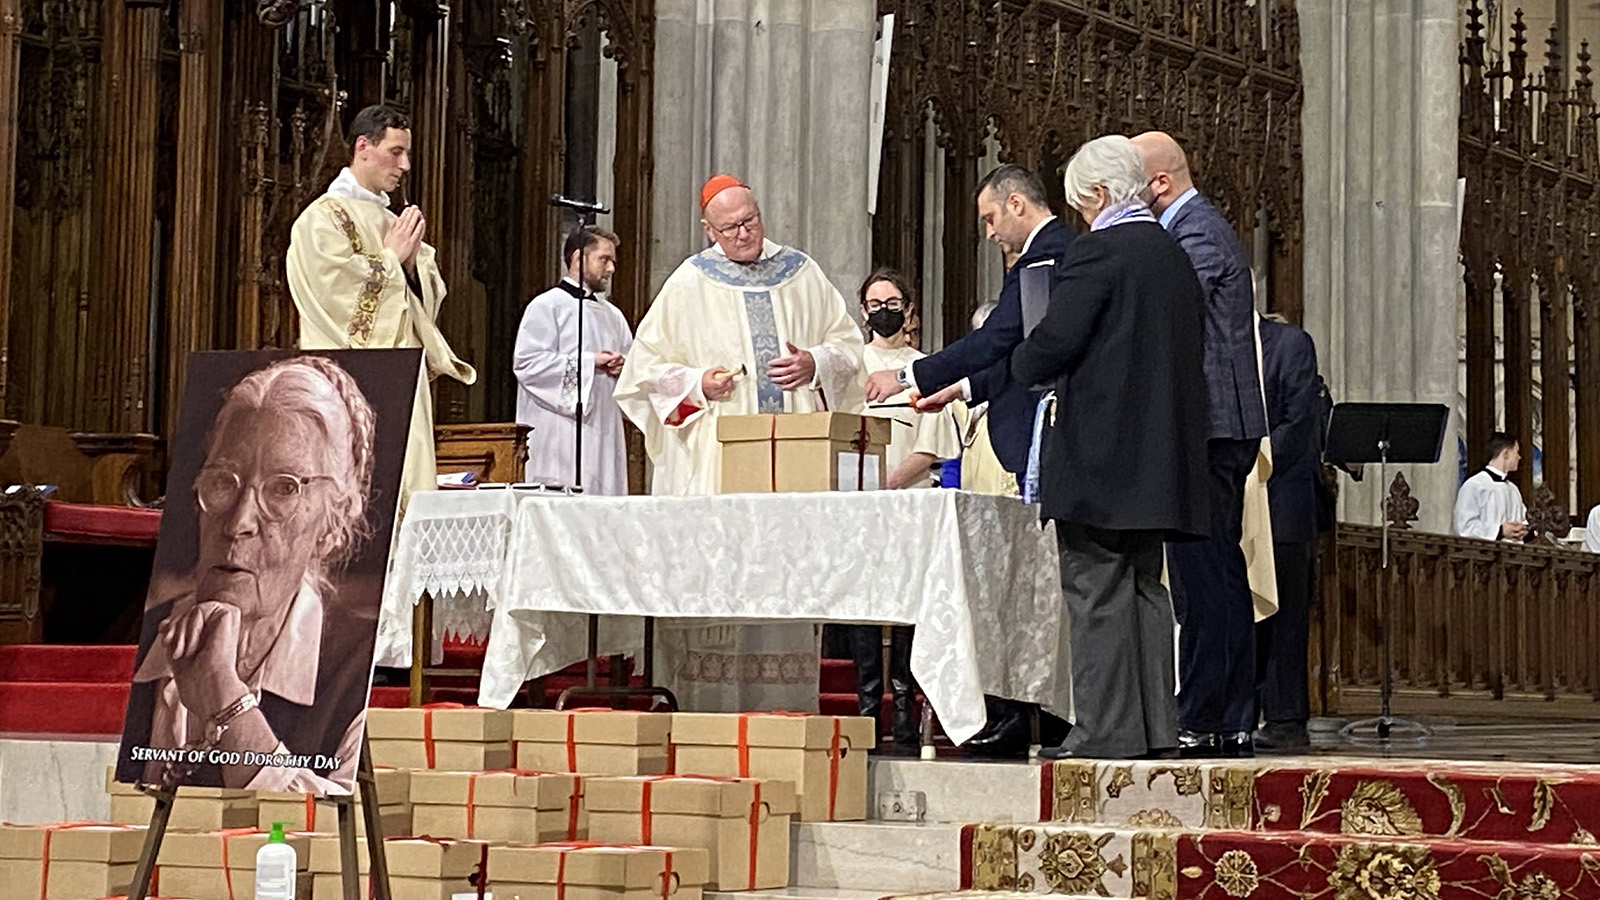 Cardinal Timothy Dolan, center, seals a cardboard box filled with evidence of Dorothy Day’s “reputation for holiness” during a Mass at St. Patrick's Cathedral in New York, Wednesday, Dec. 8, 2021. The boxes will be sent to the Congregation for the Causes of Saints in Rome. RNS photo by Renée Roden